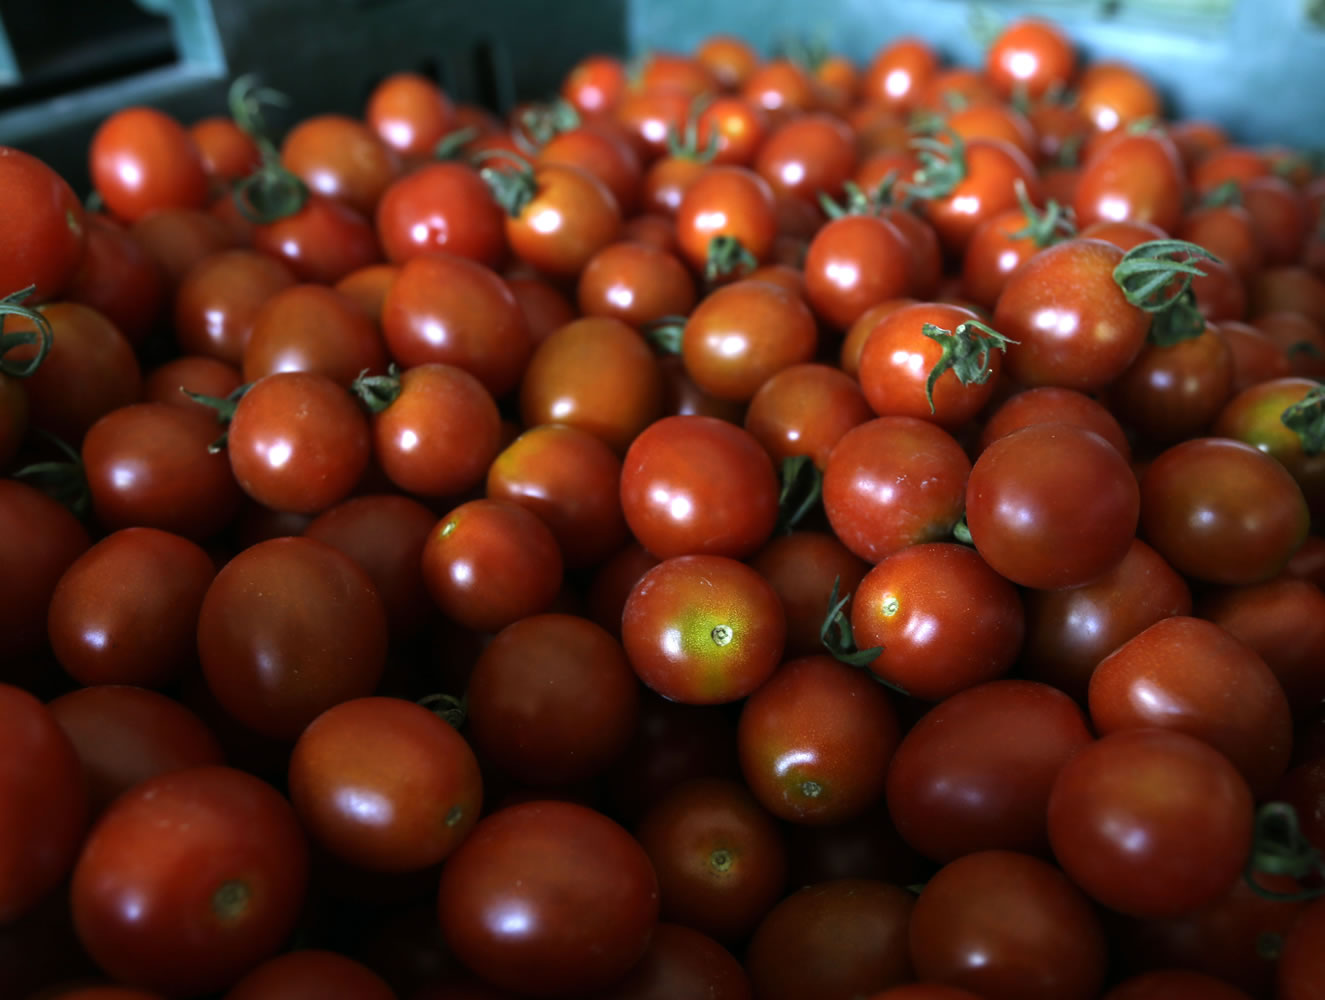 Fresh cherry tomatoes are stored in a barn at Denison Farm on Monday, Aug. 12, 2013, in Schaghticoke, N.Y.